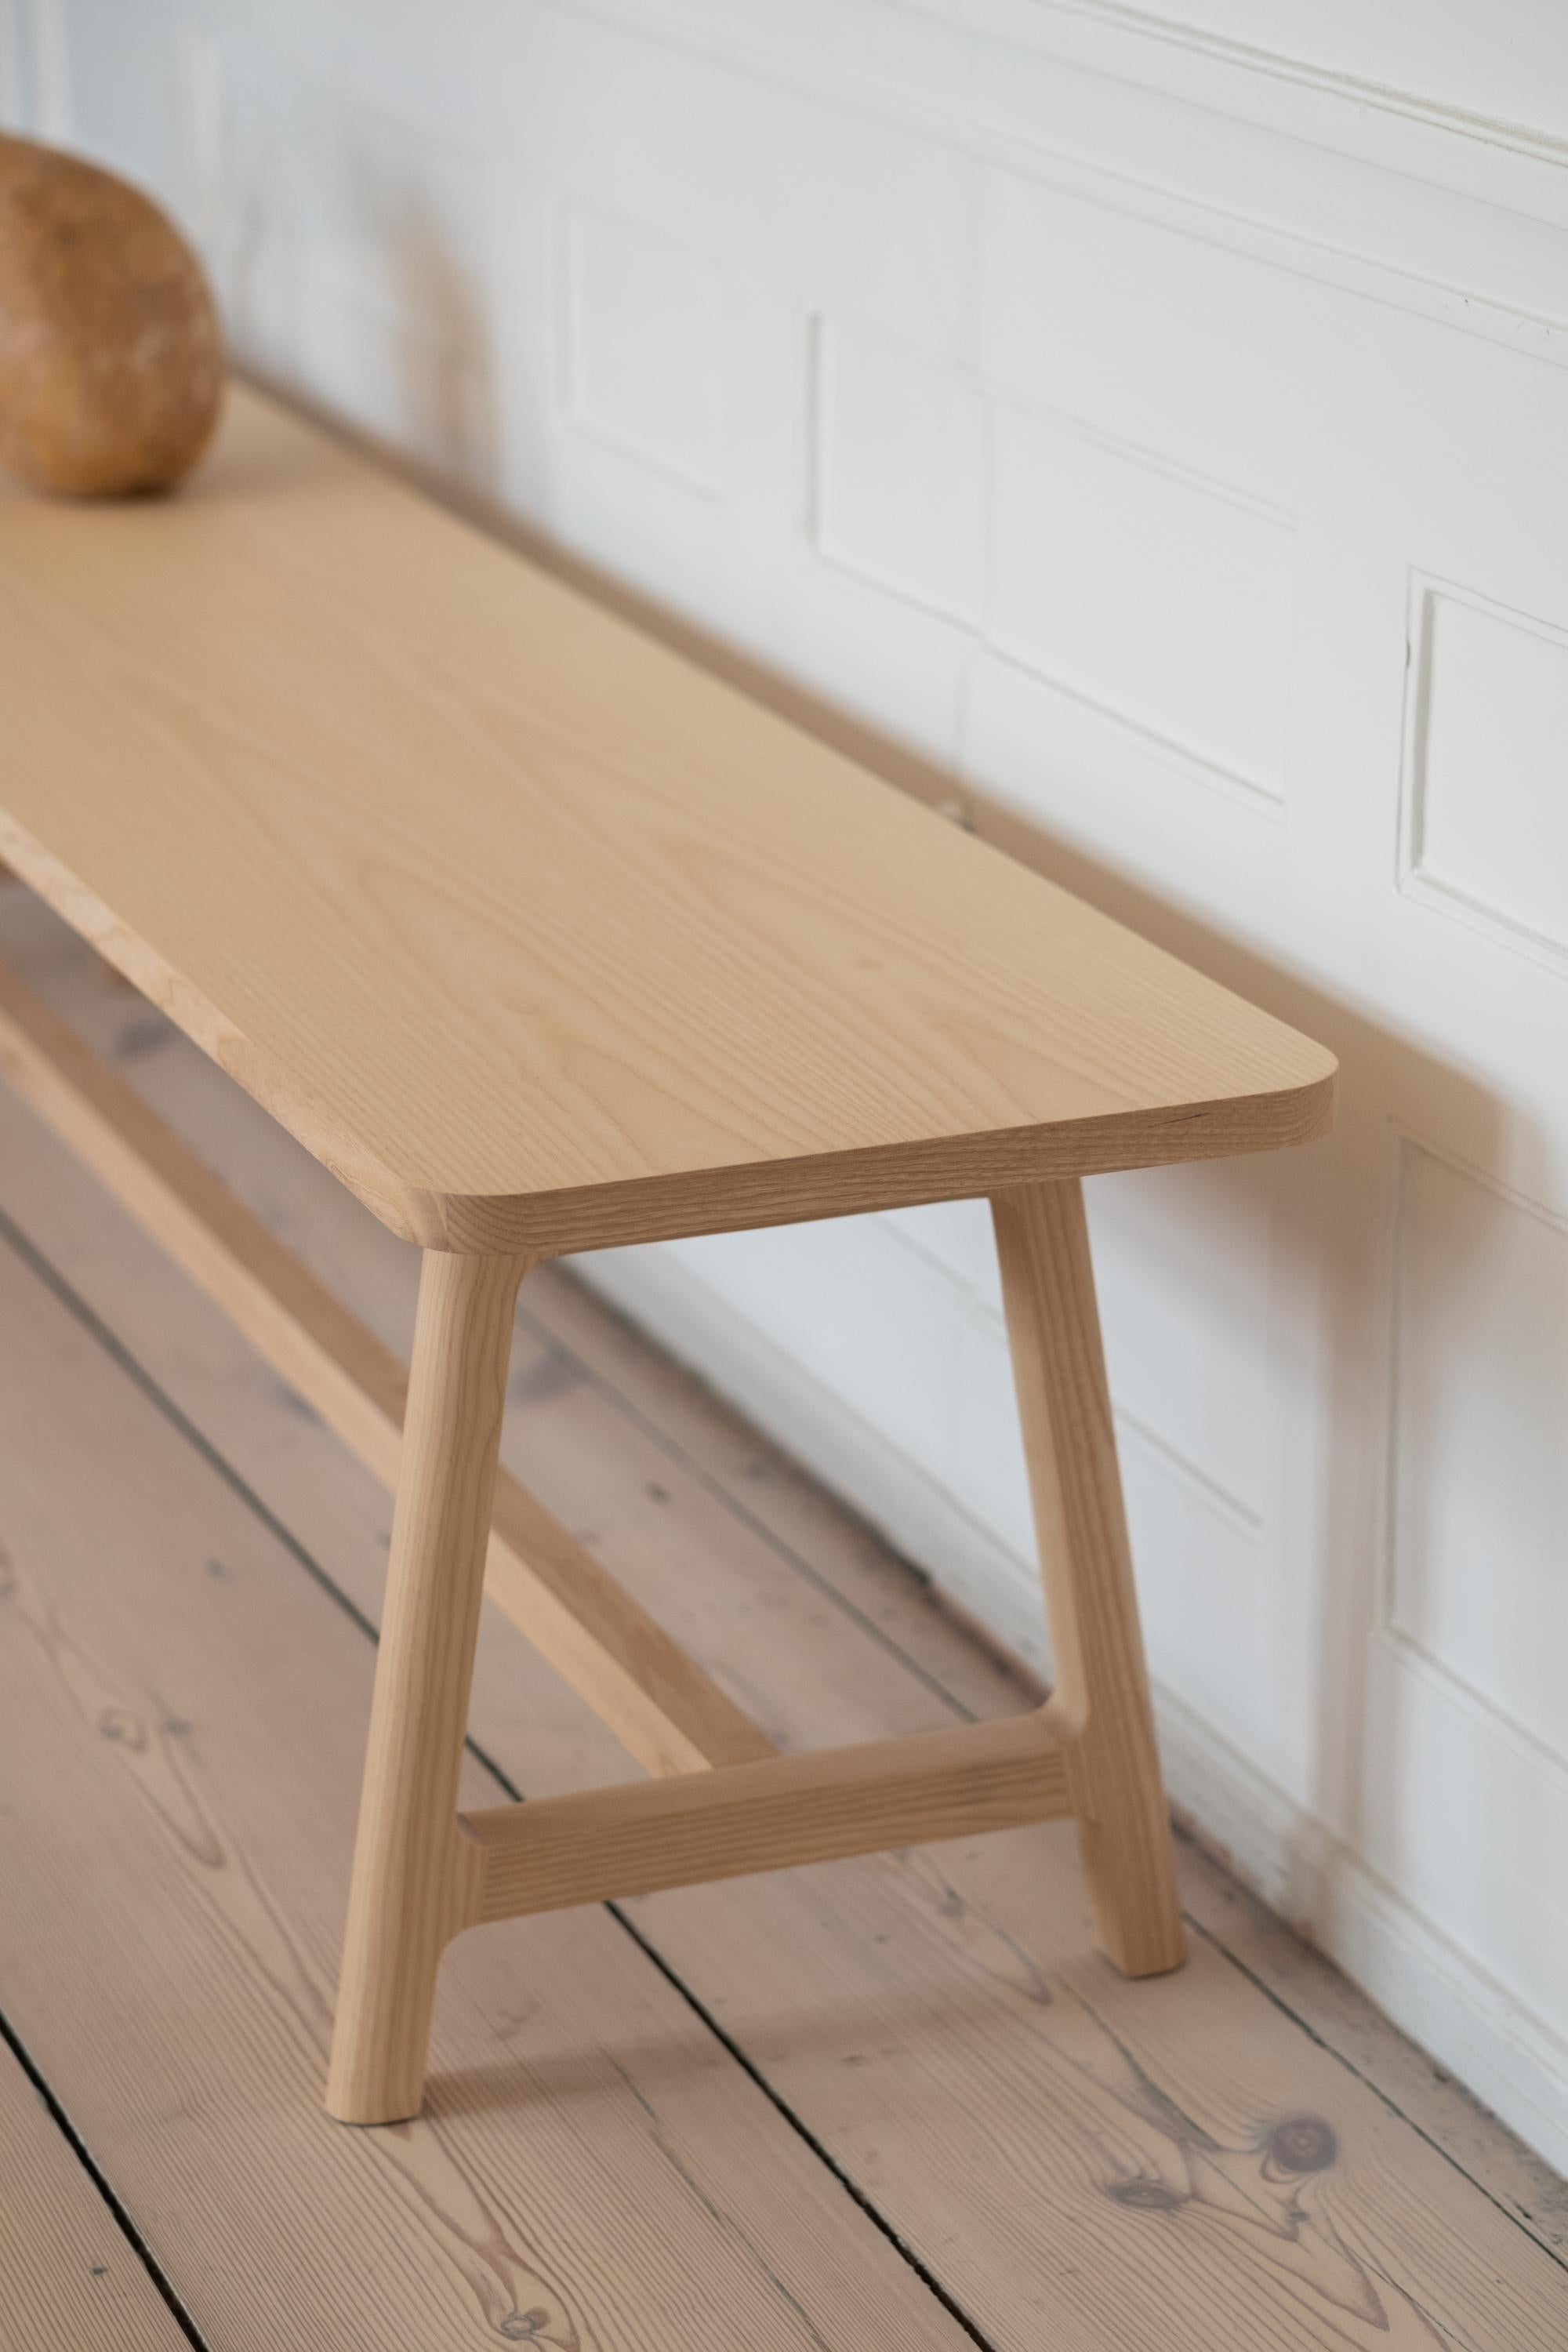 Portuguese Minimalist Modern Bench in Oak Wood Frame Collection For Sale